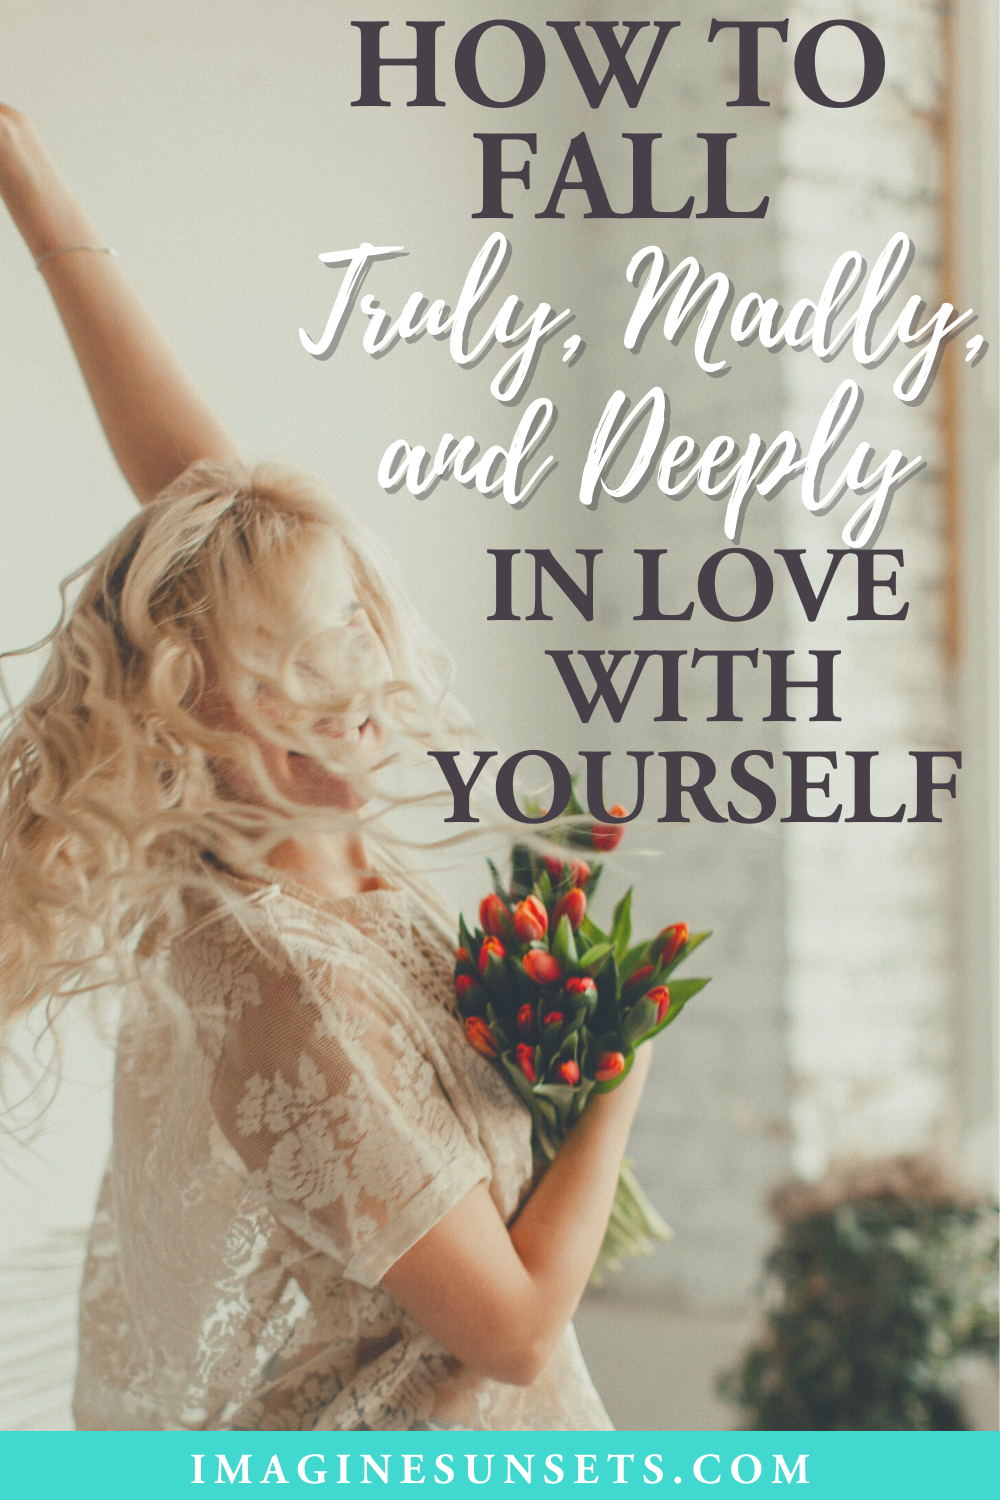 how to fall truly, madly, and deeply in love with yourself